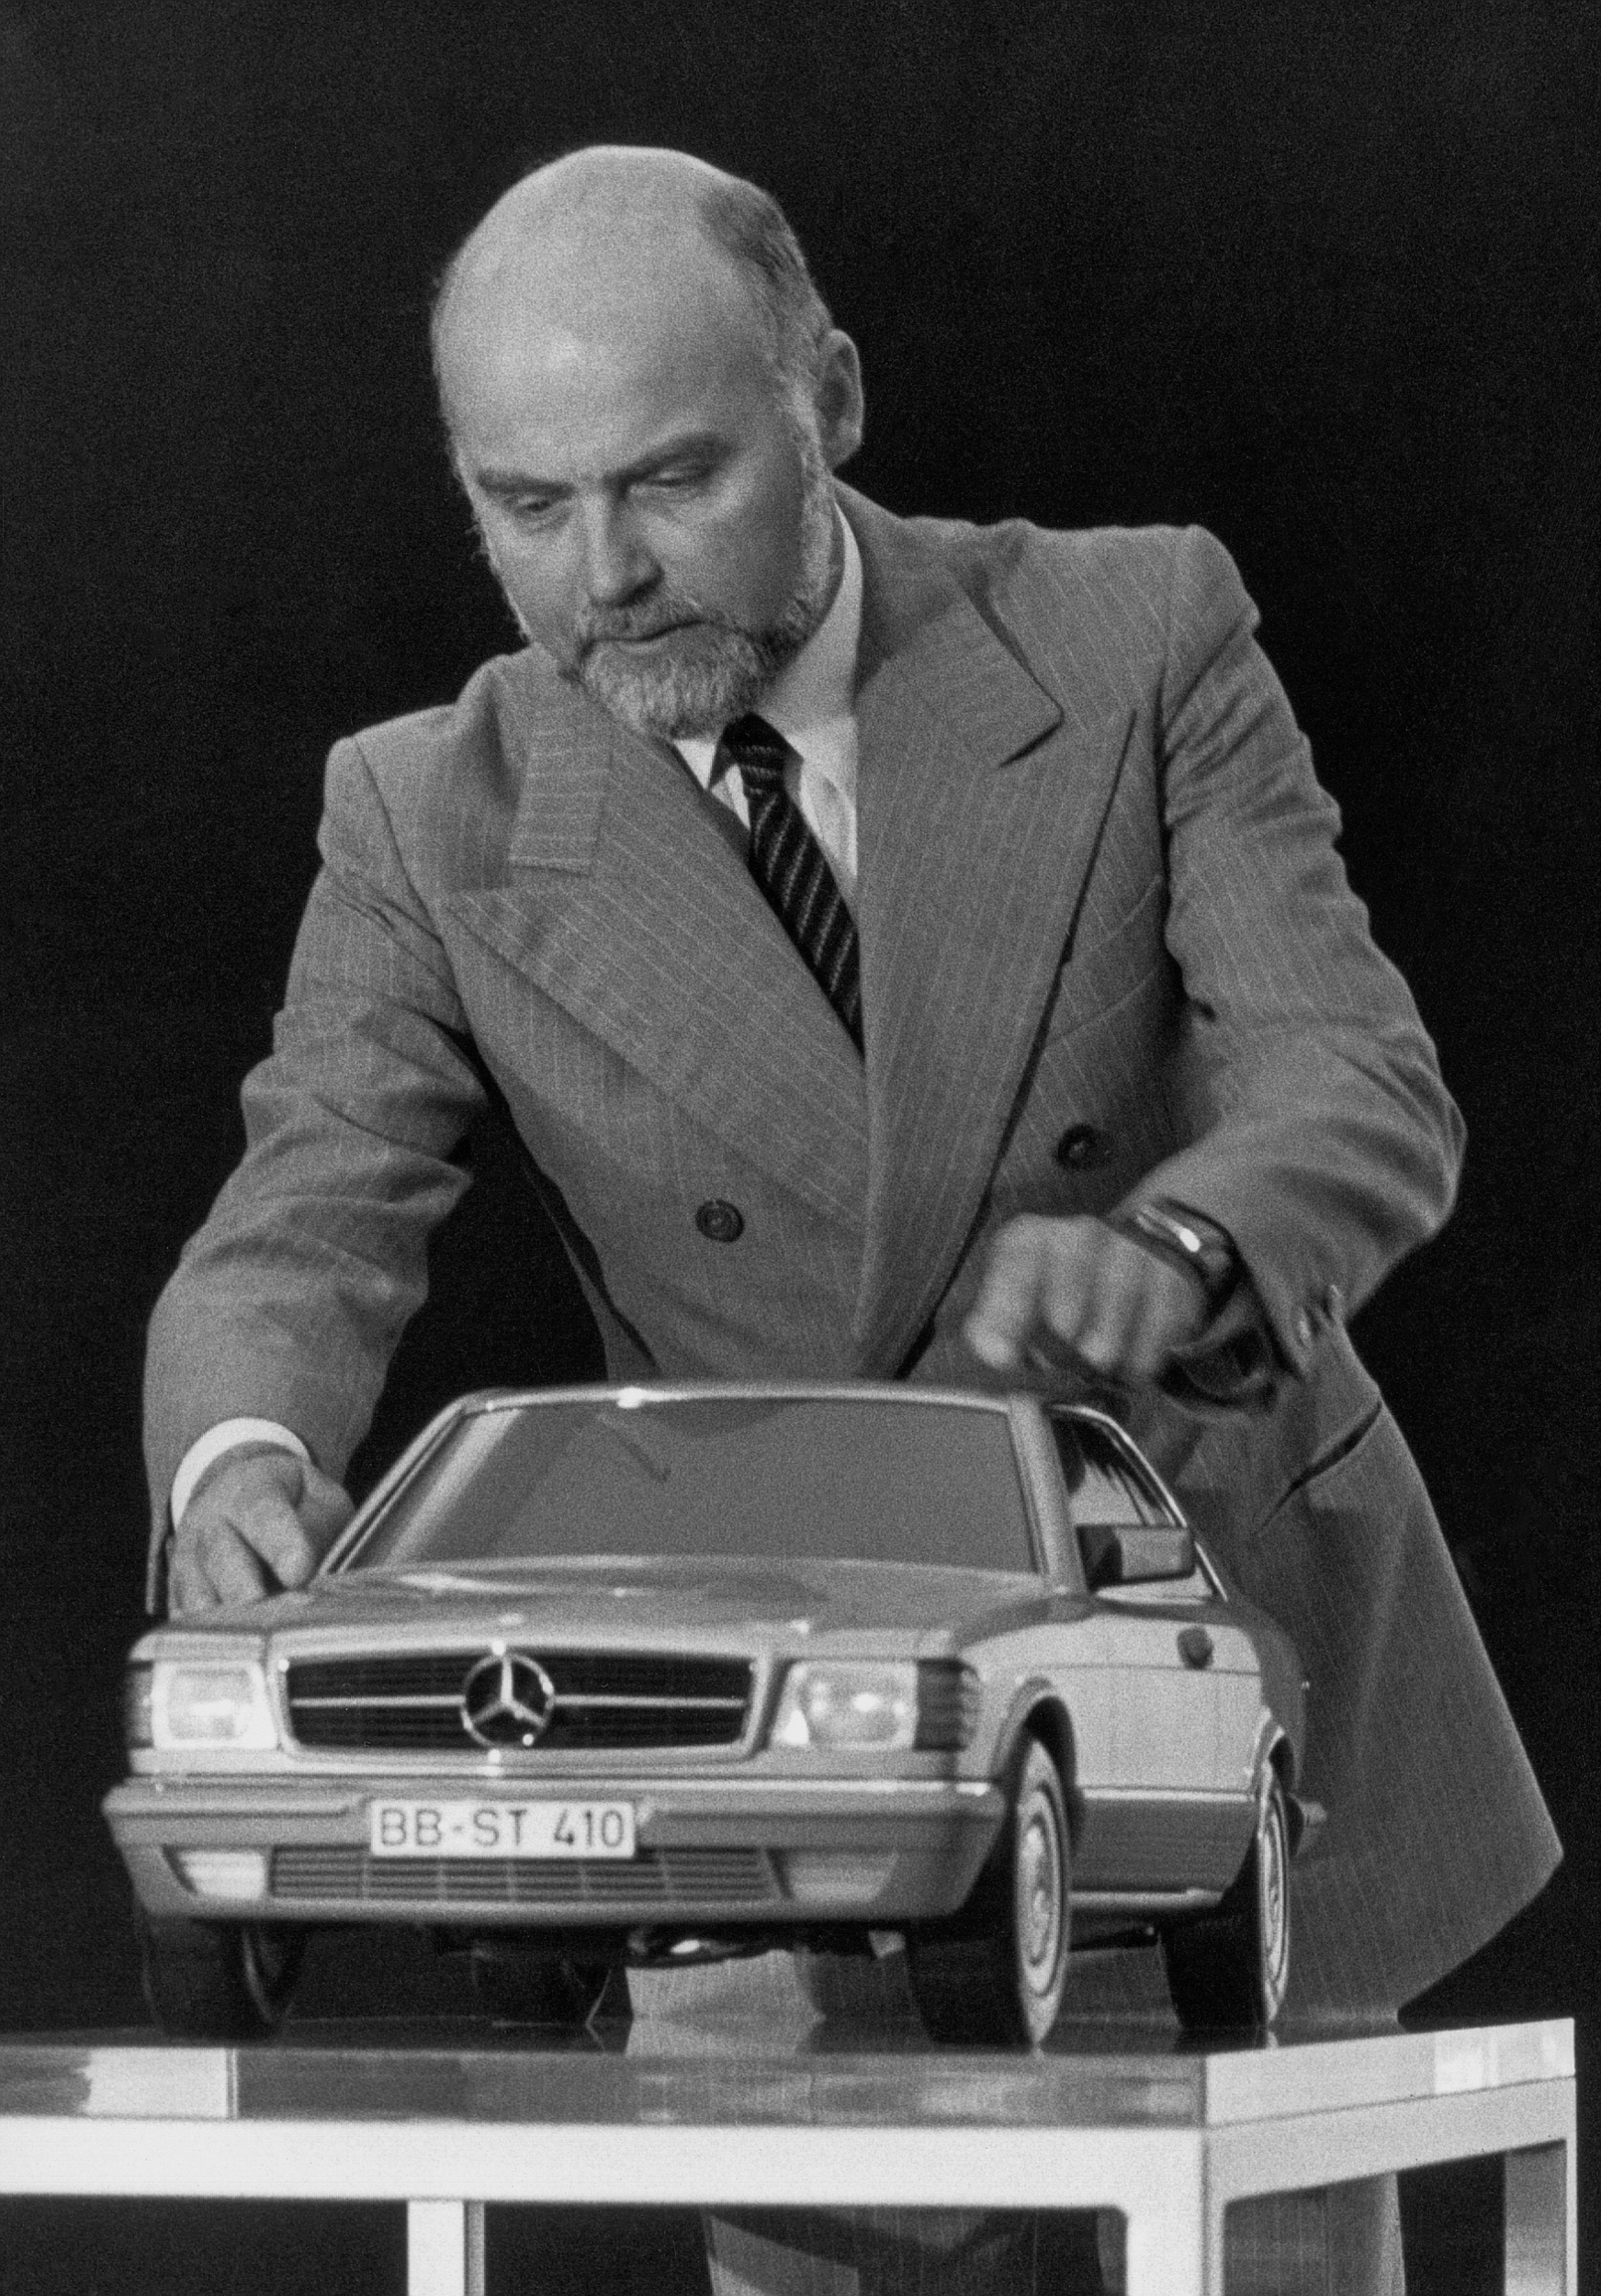 Mercedes-Benz S-Class Coupé of the 126 model series. It was presented at the International Motor Show in Frankfurt am Main (IAA) from 17 to 27 September 1981. The design was created under the direction of Bruno Sacco. (Photo signature in the Mercedes-Benz Classic archive: C32704)